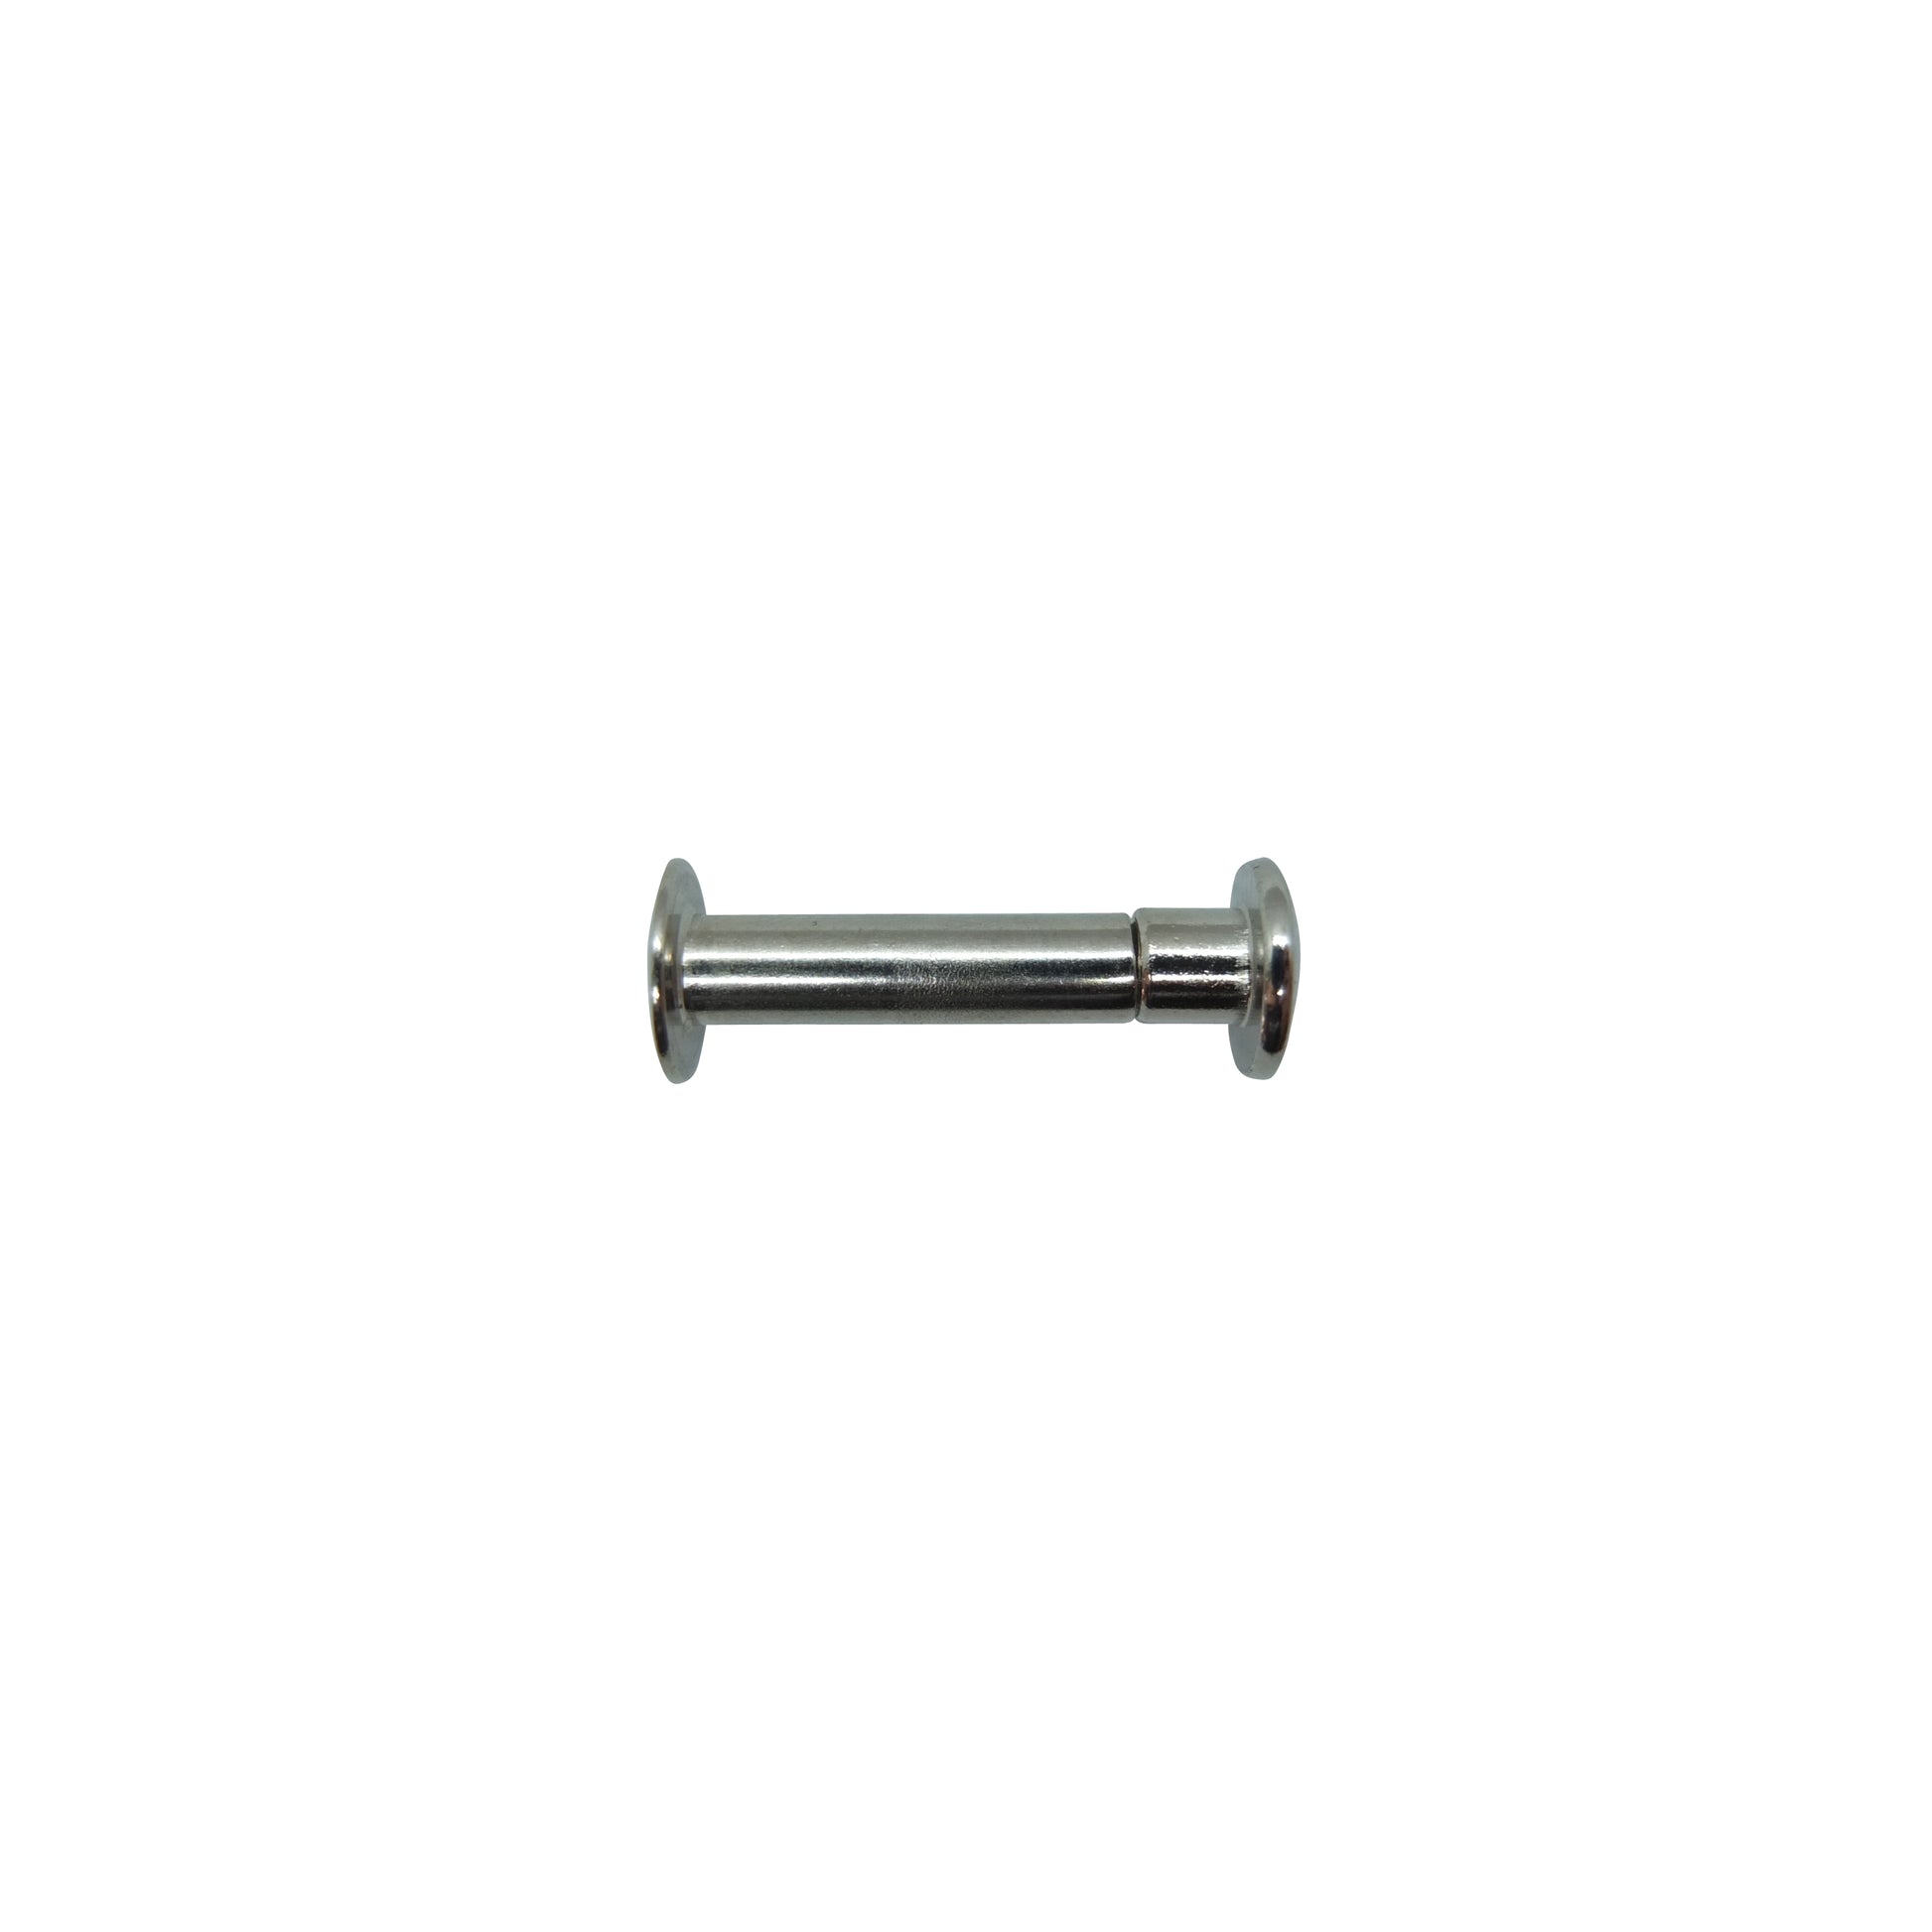 Gobrecht & Ulrich 5mm Extension Screw Example with Binding Screw